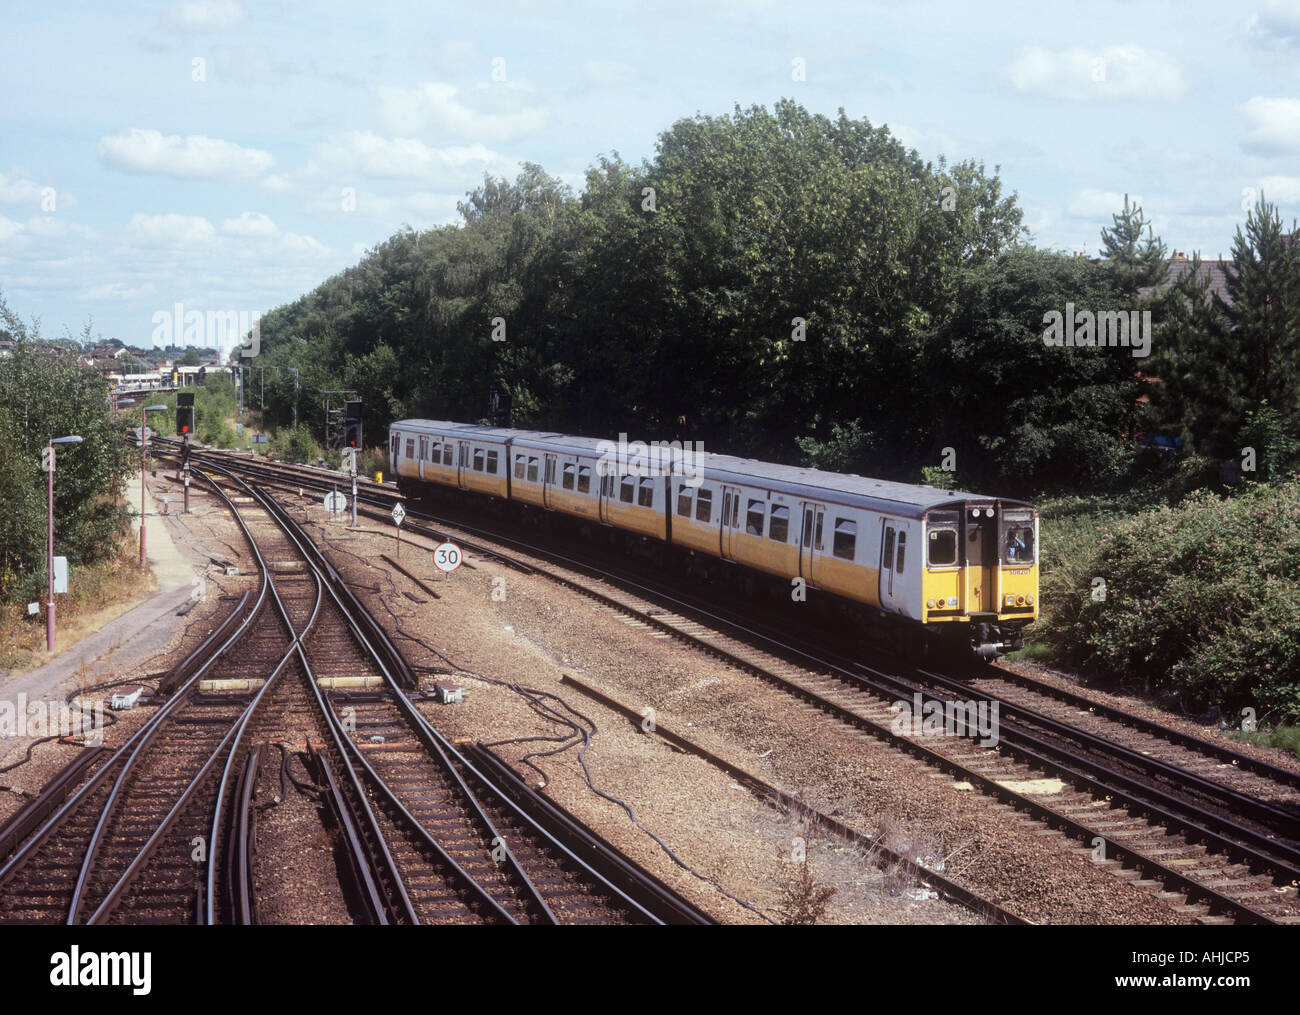 Connex Class 508 EMU No 508201 Joining the Redhill Line at Tonbridge. Stock Photo